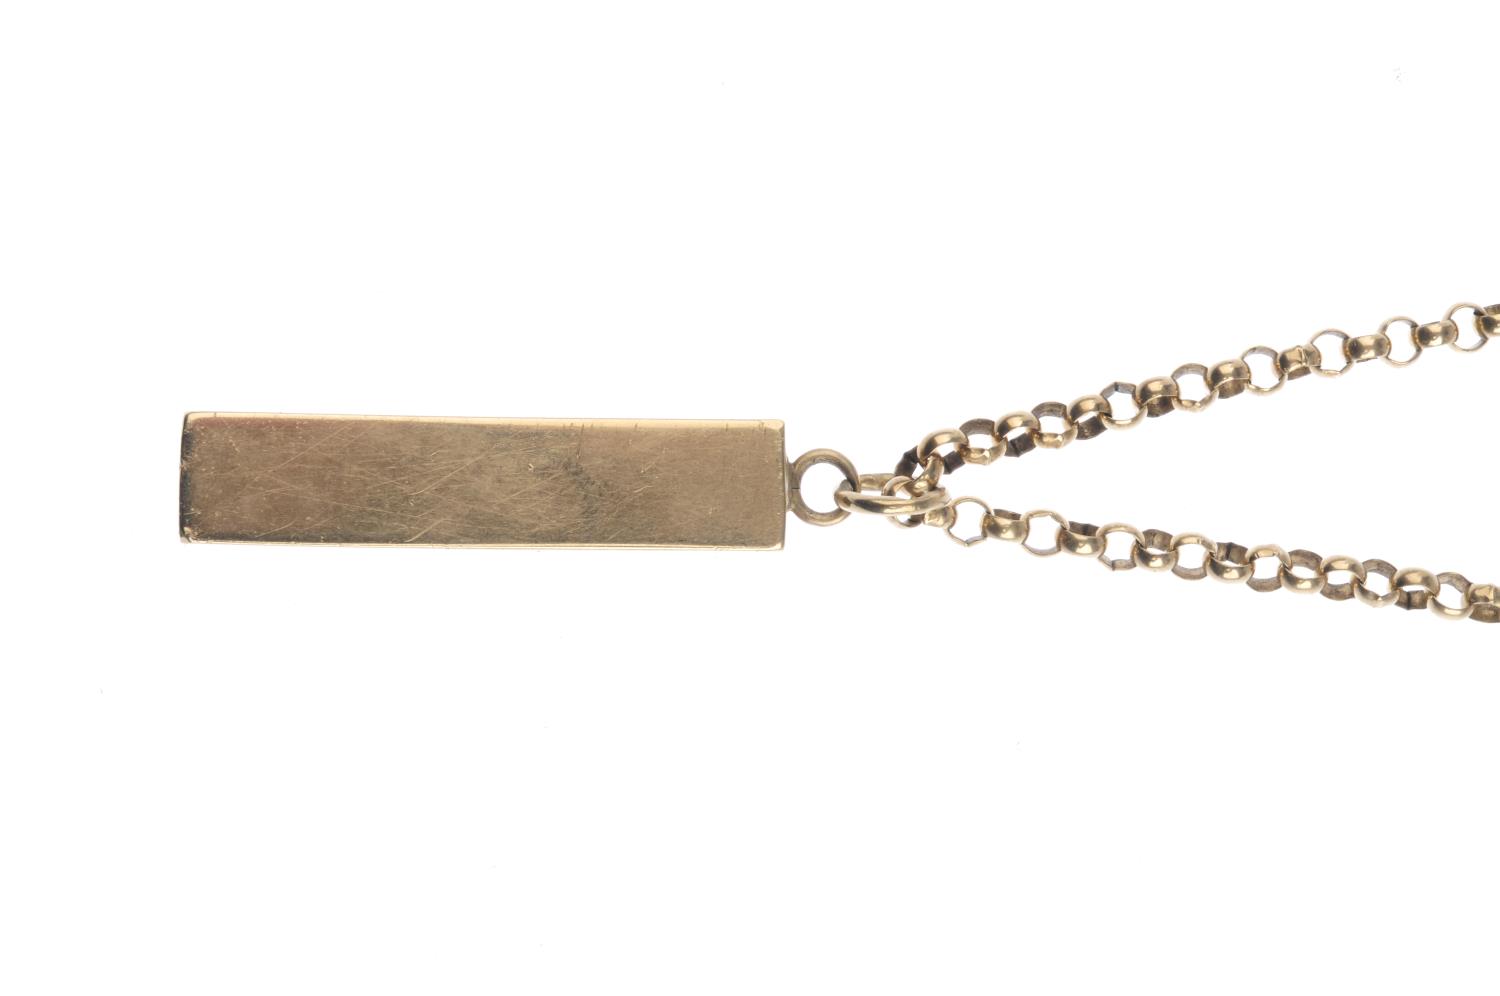 (52407) A 9ct gold pendant, with chain. Designed as a rectangular ingot bar, suspended from a - Image 2 of 3